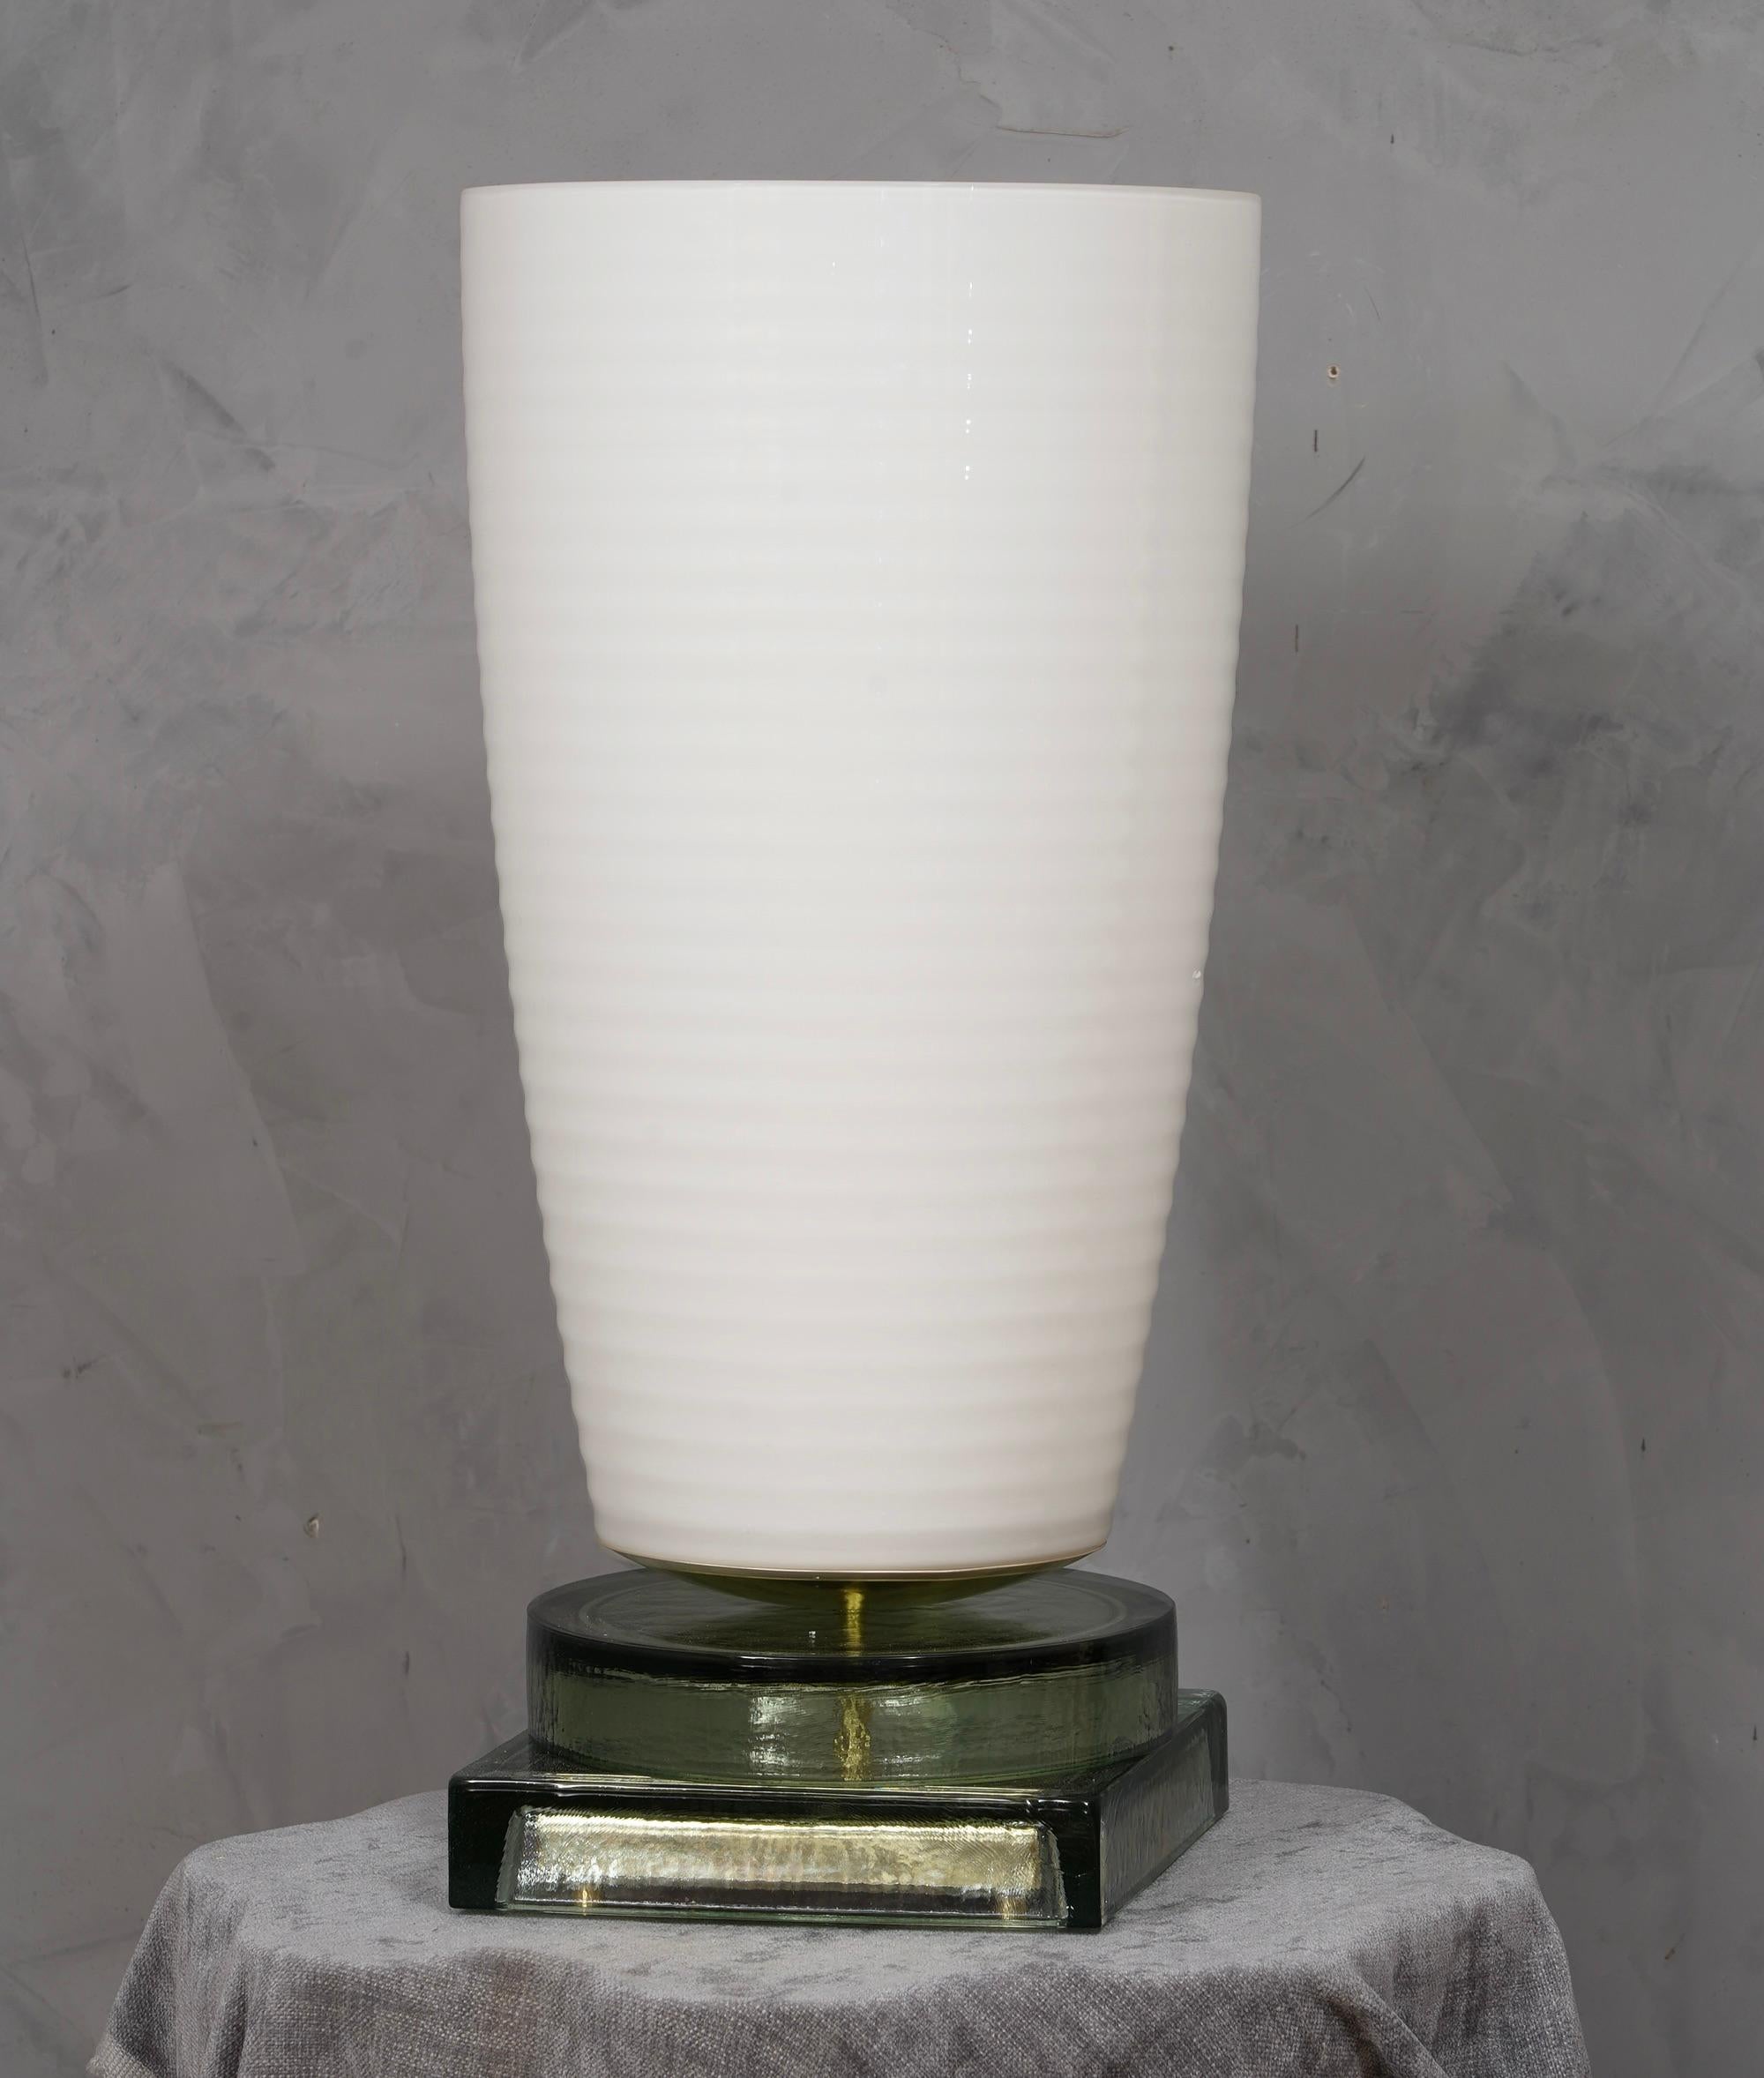 Precious and unique hand-blown Murano white glass, classic but original design with a strong contrast between the large white vase and the transparent glass base.

The lamp is characterized by a large white vase with a slightly flared shape, with